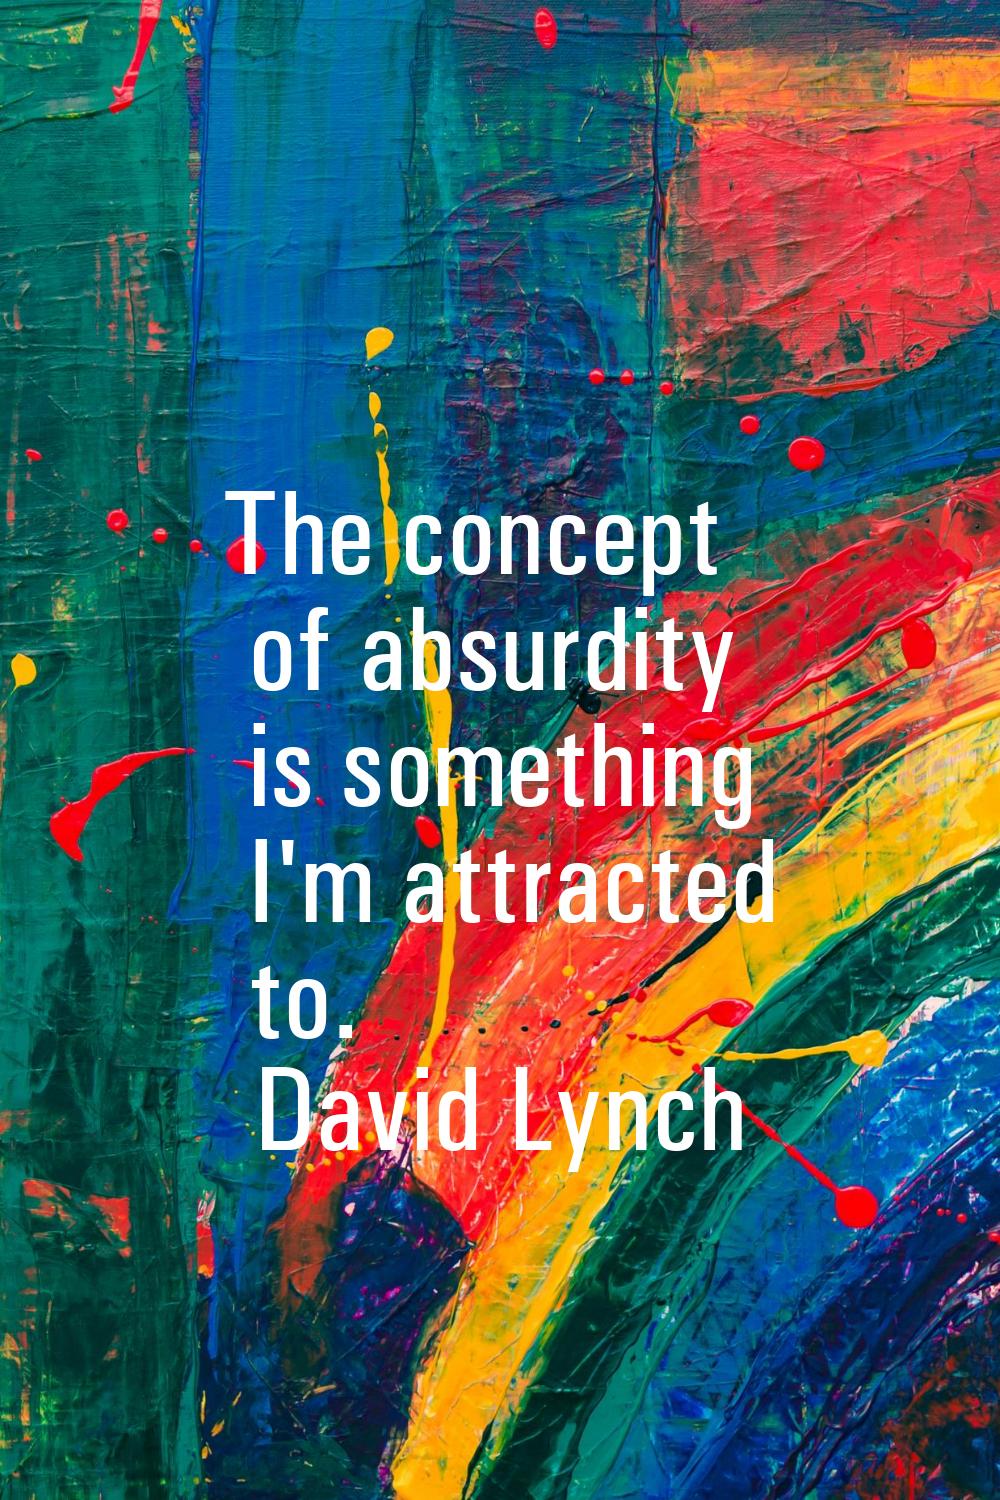 The concept of absurdity is something I'm attracted to.